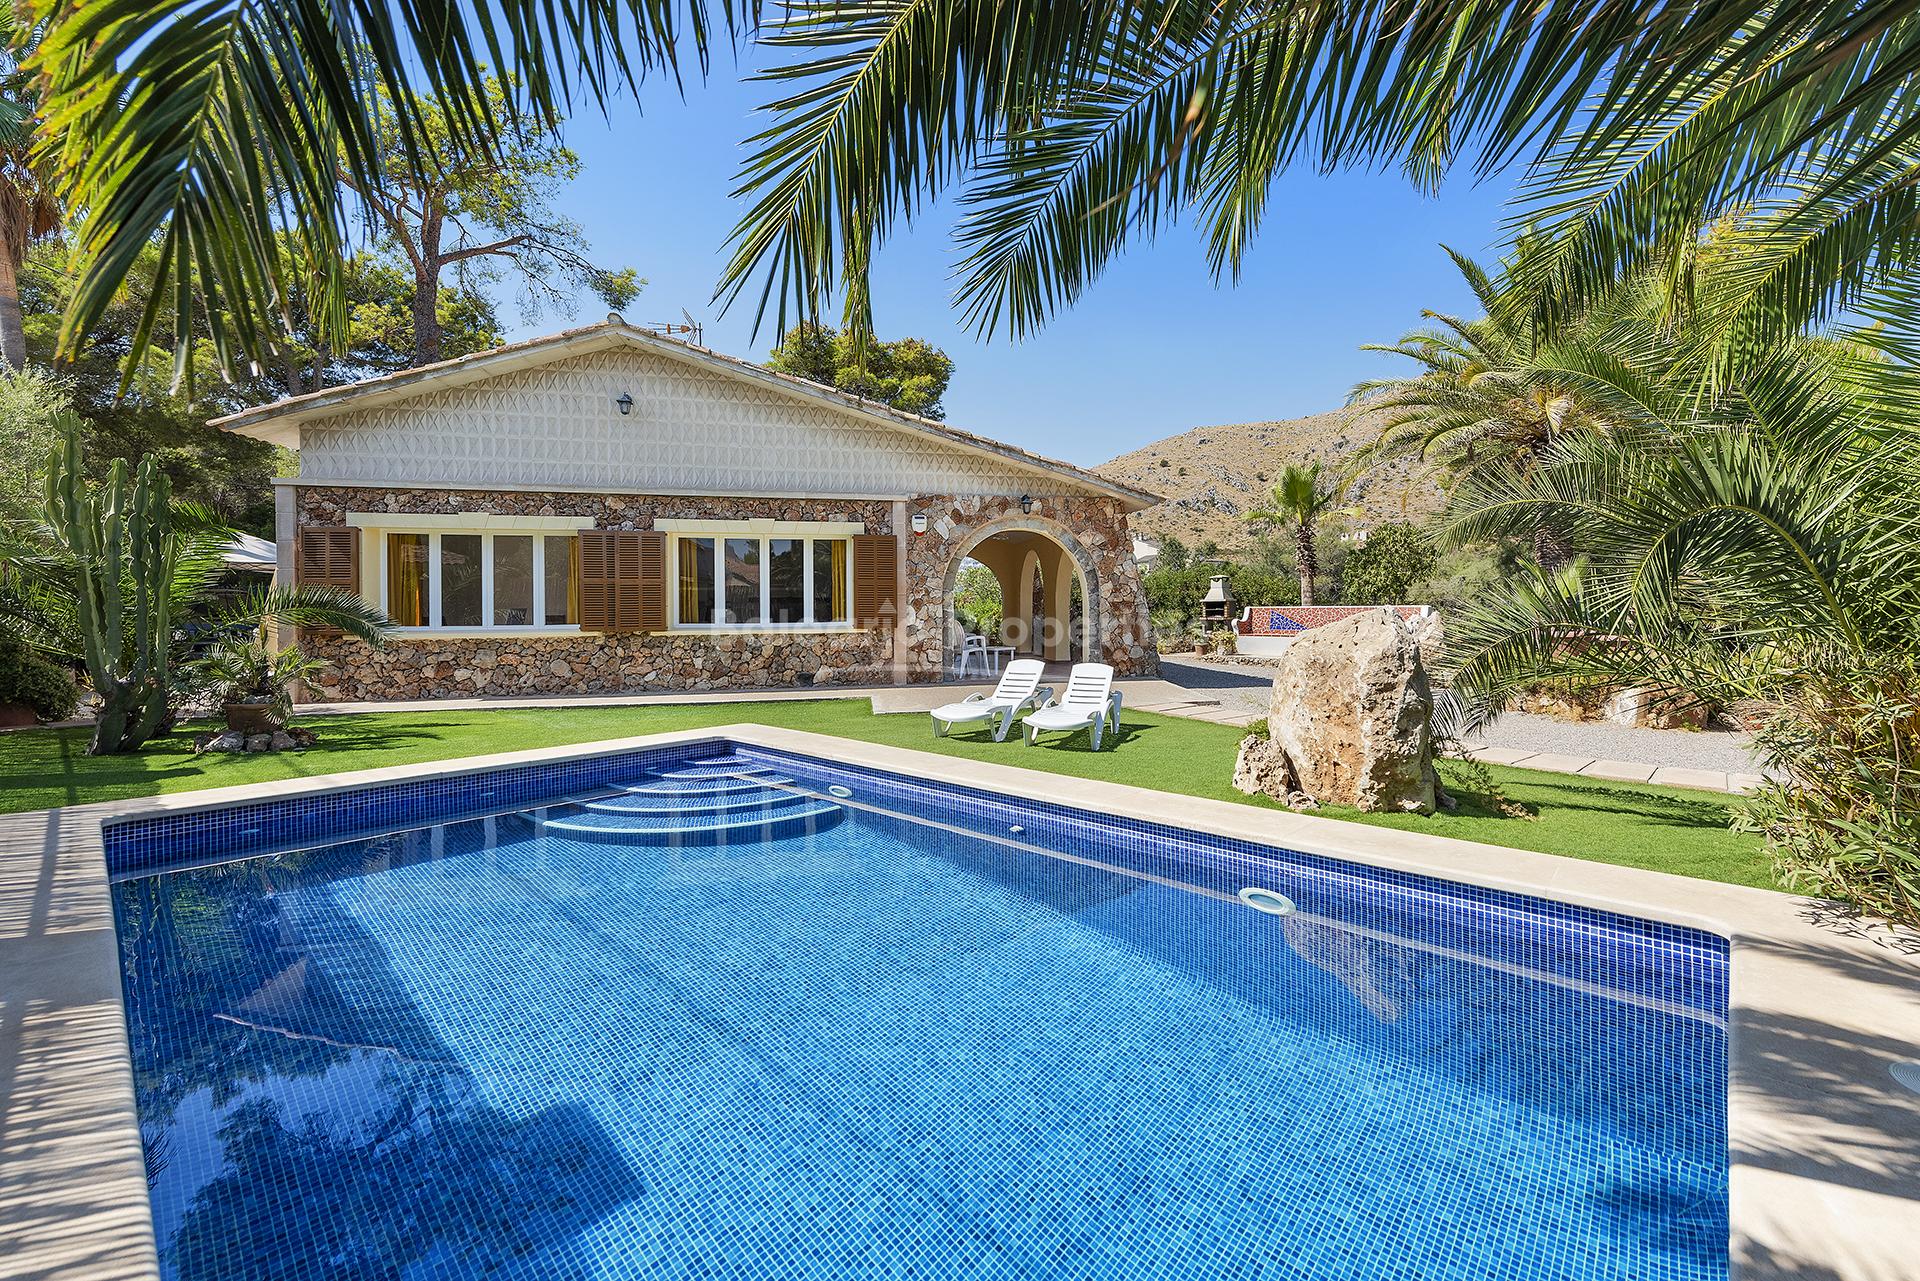 Detached villa for sale with holiday rental license close to the beach in Alcudia, Mallorca